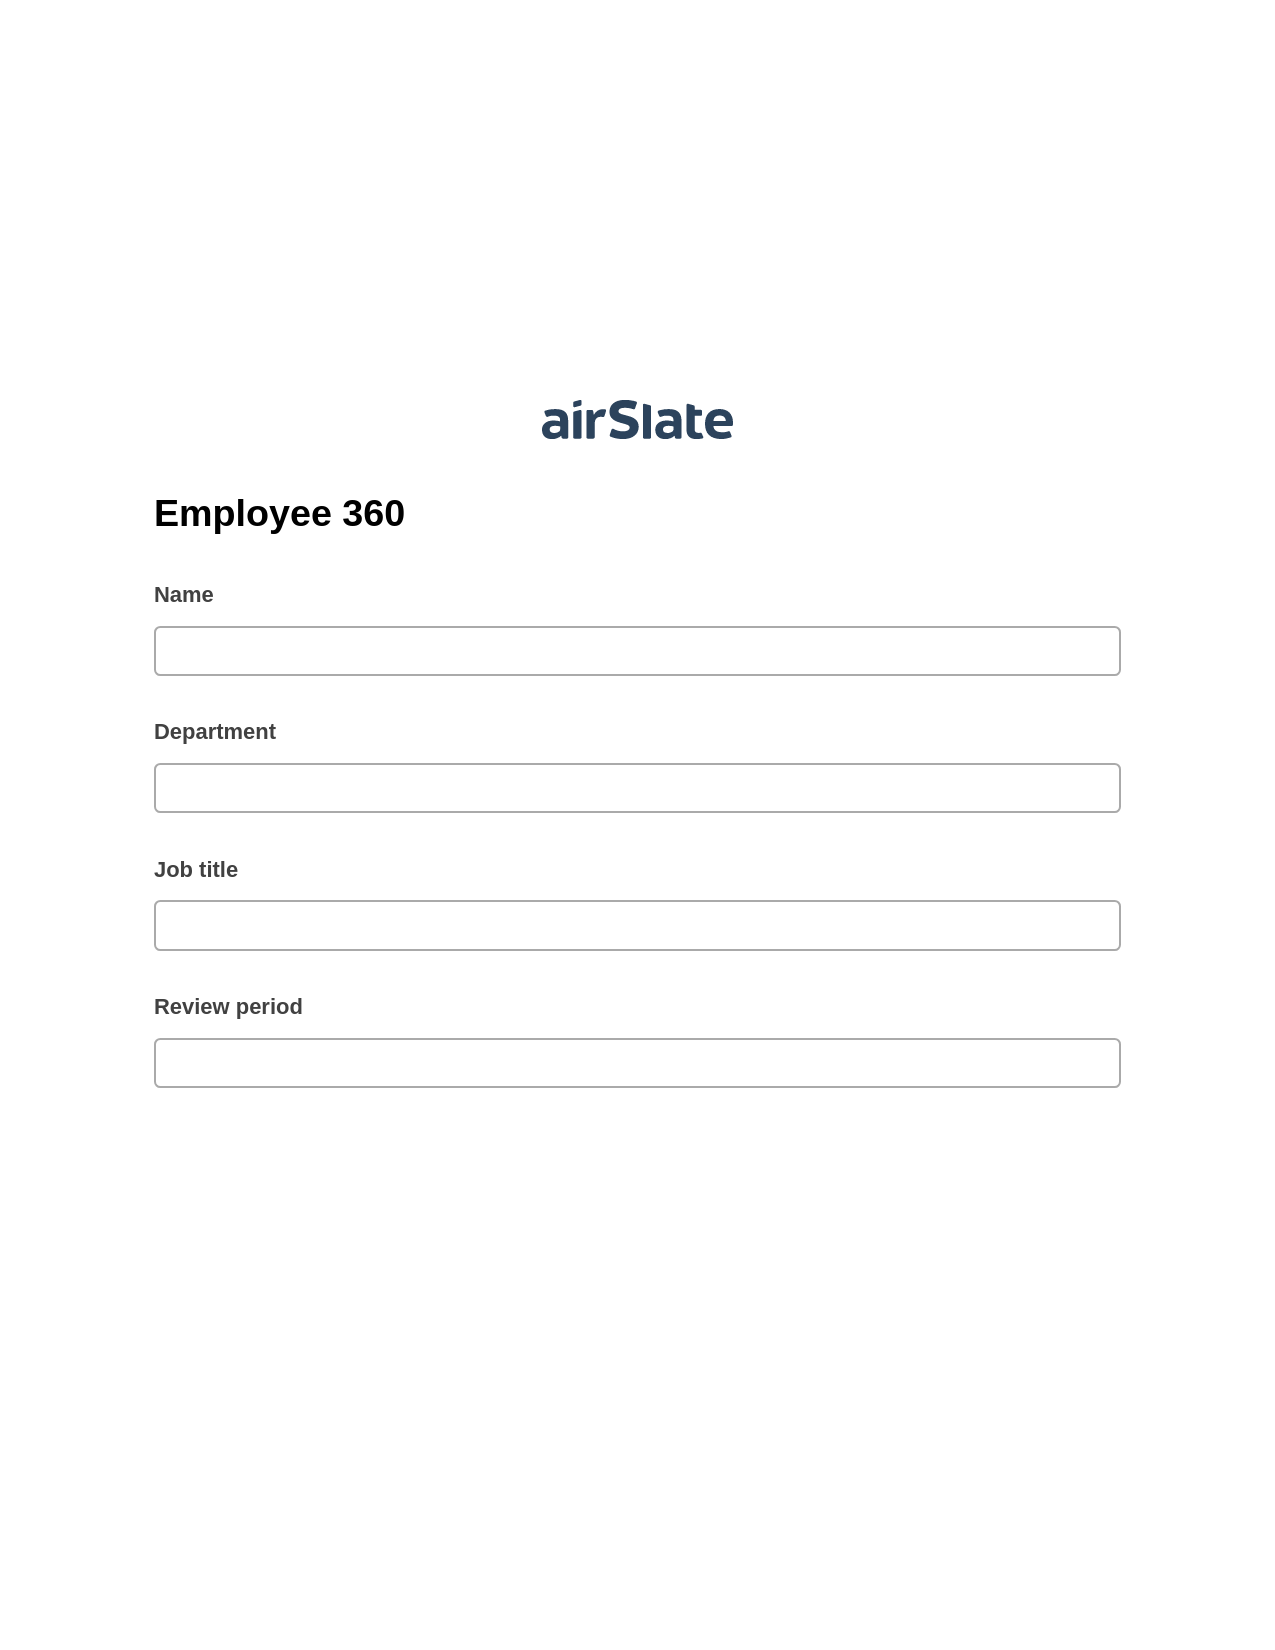 Multirole Employee 360 Pre-fill from another Slate Bot, Create MS Dynamics 365 Records Bot, Slack Notification Postfinish Bot